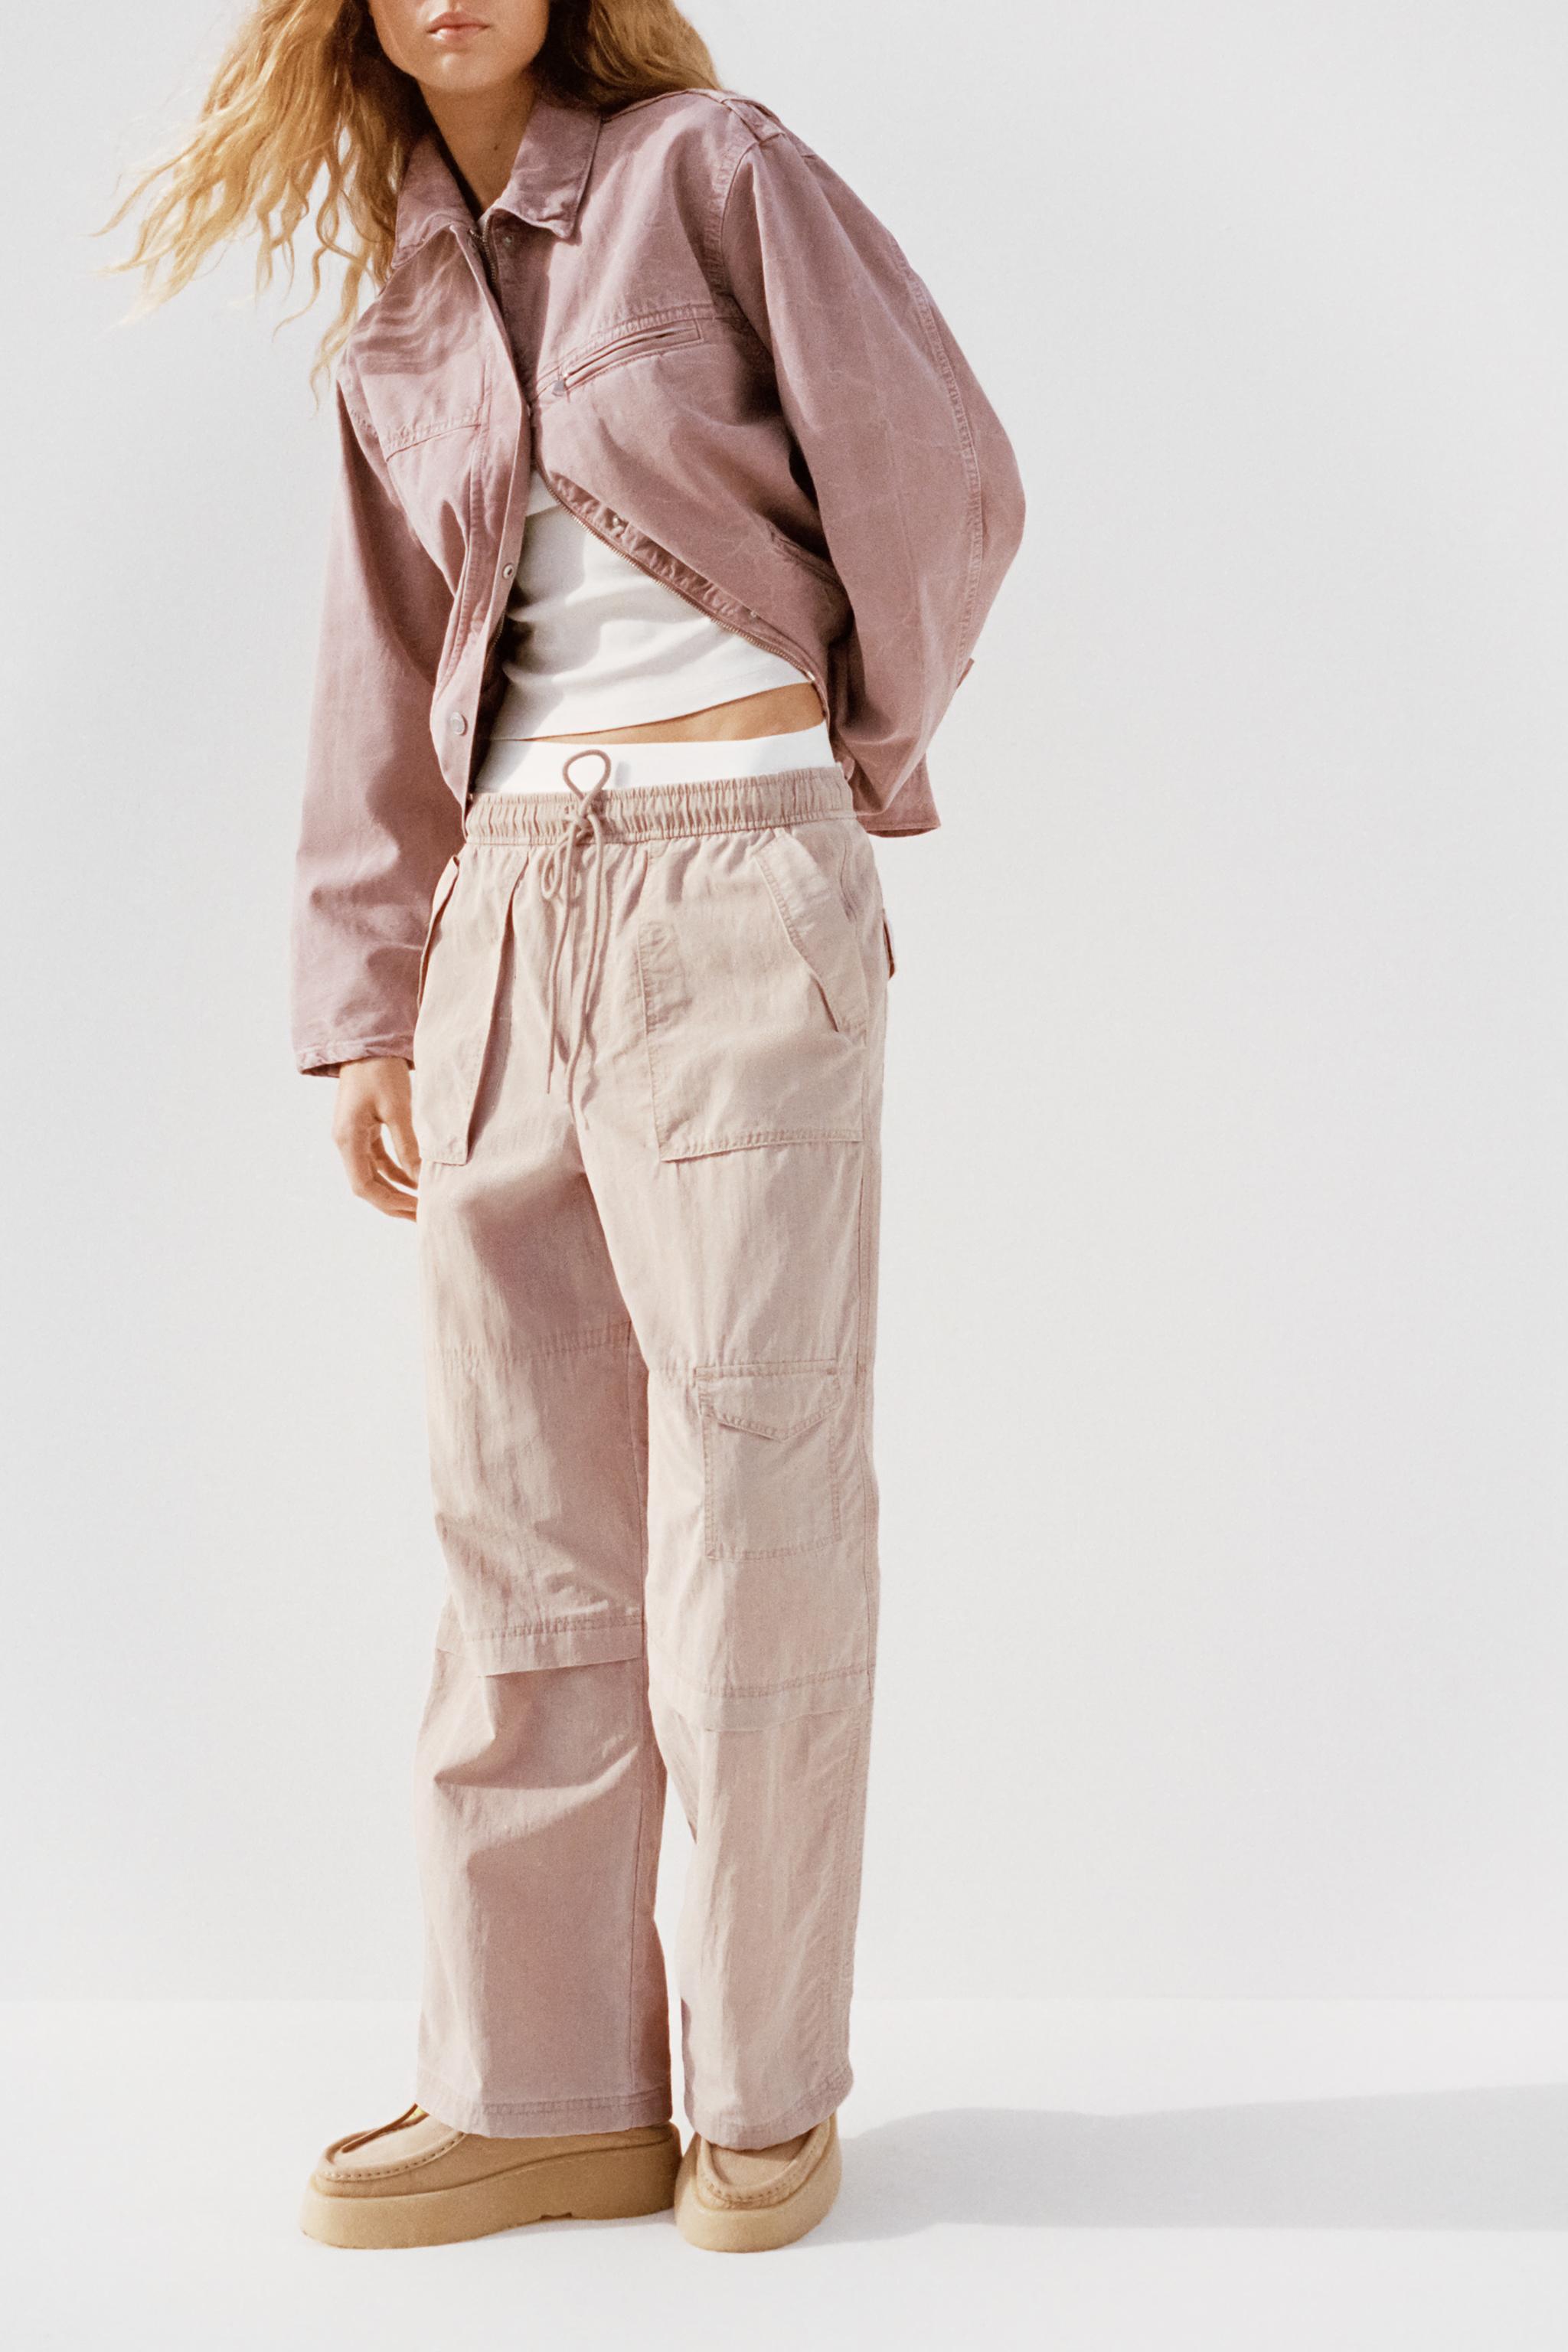 Zara belted high waisted pink pants bloggers fav Sizes M & L availableNWT